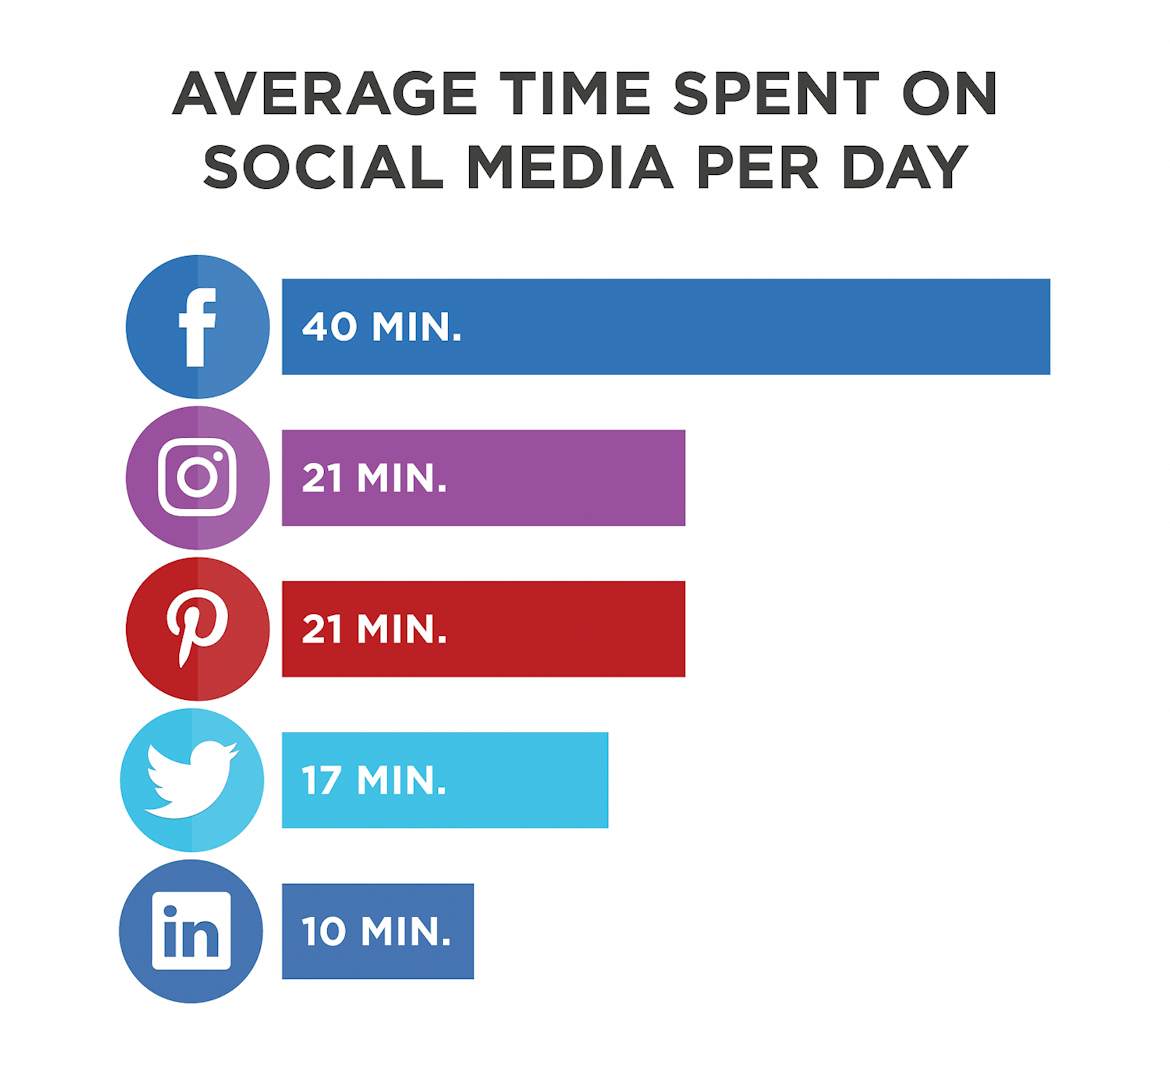 Social media users spend an average of 22 minutes browsing each day